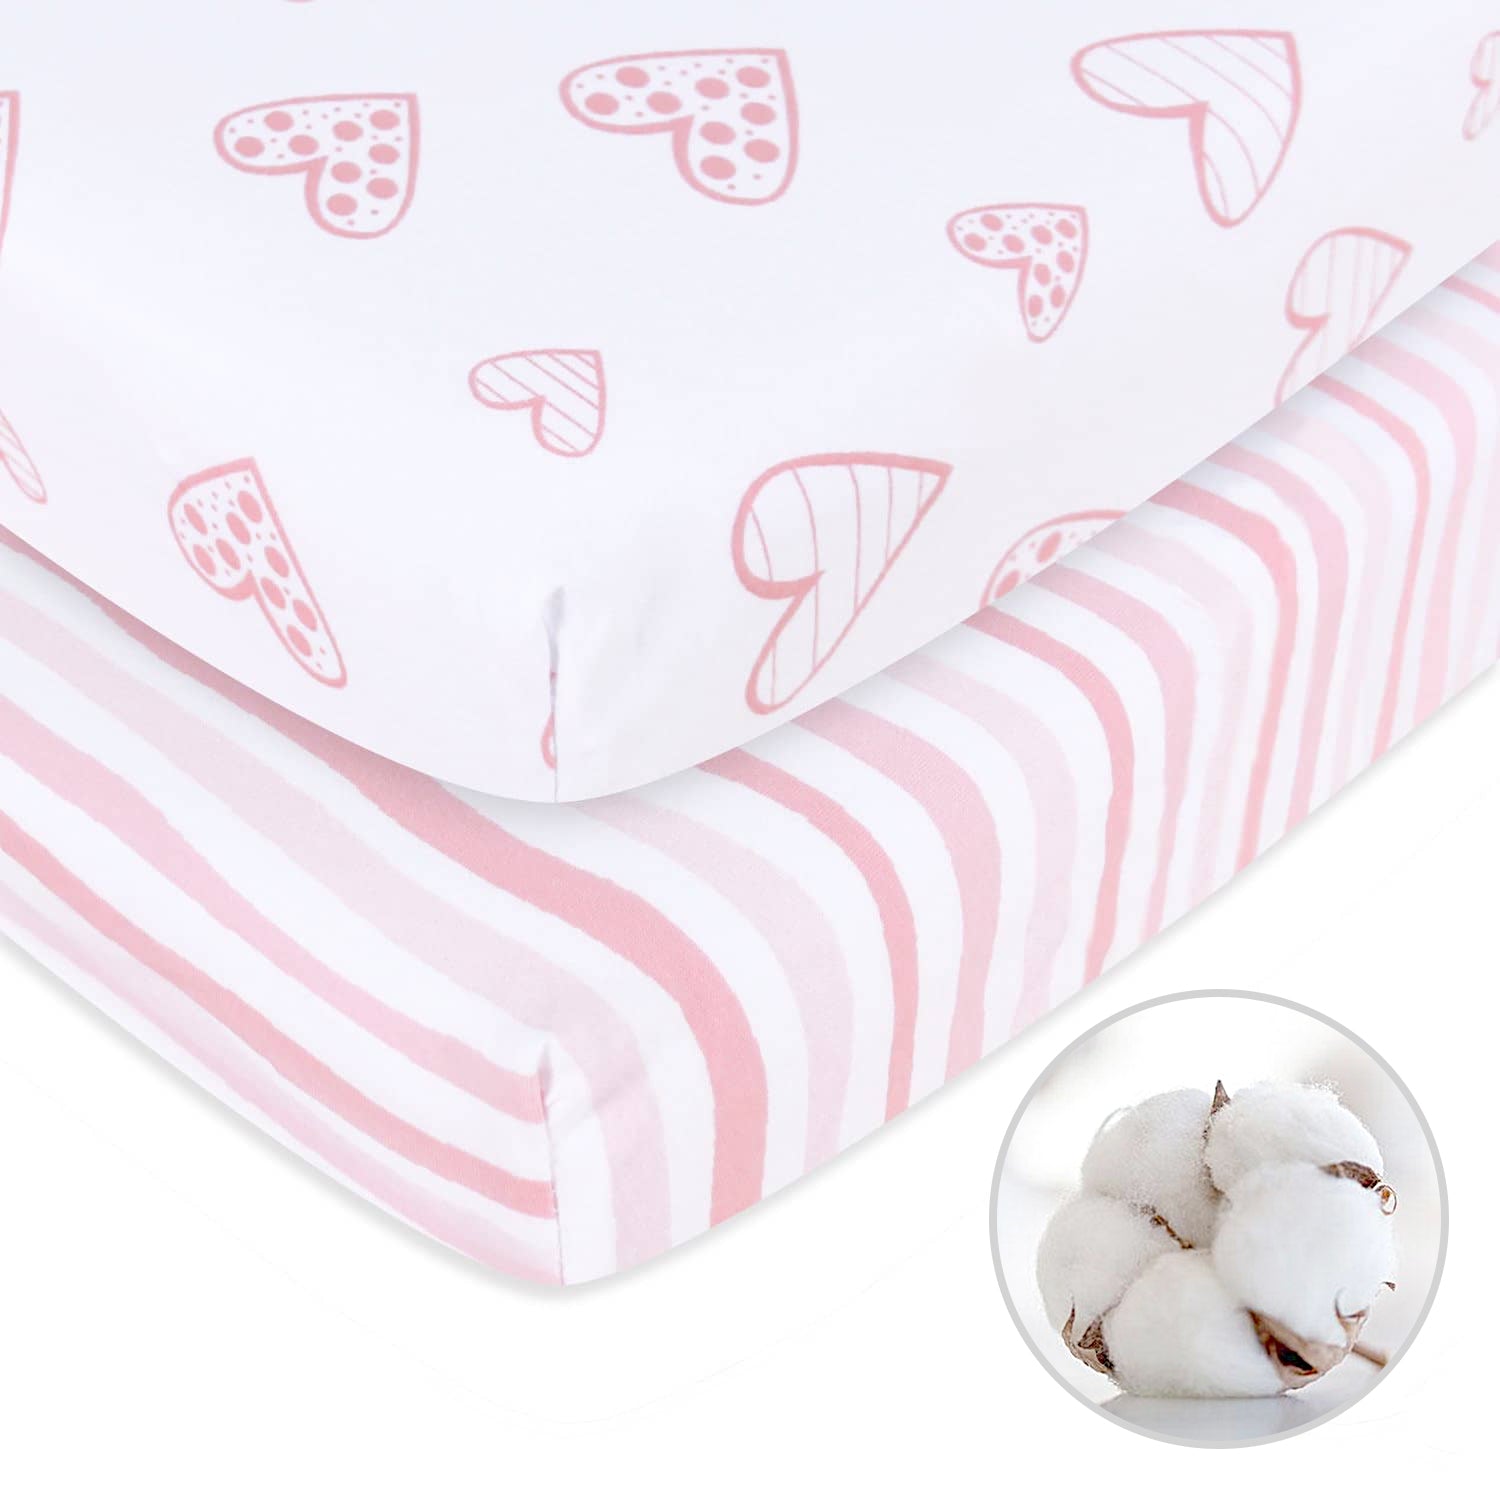 Pack n Play Sheet | Mini Crib Sheet - 2 Pack, 100% Jersey Cotton, Fits Graco Pack and Play, Pink & White - Biloban Online Store